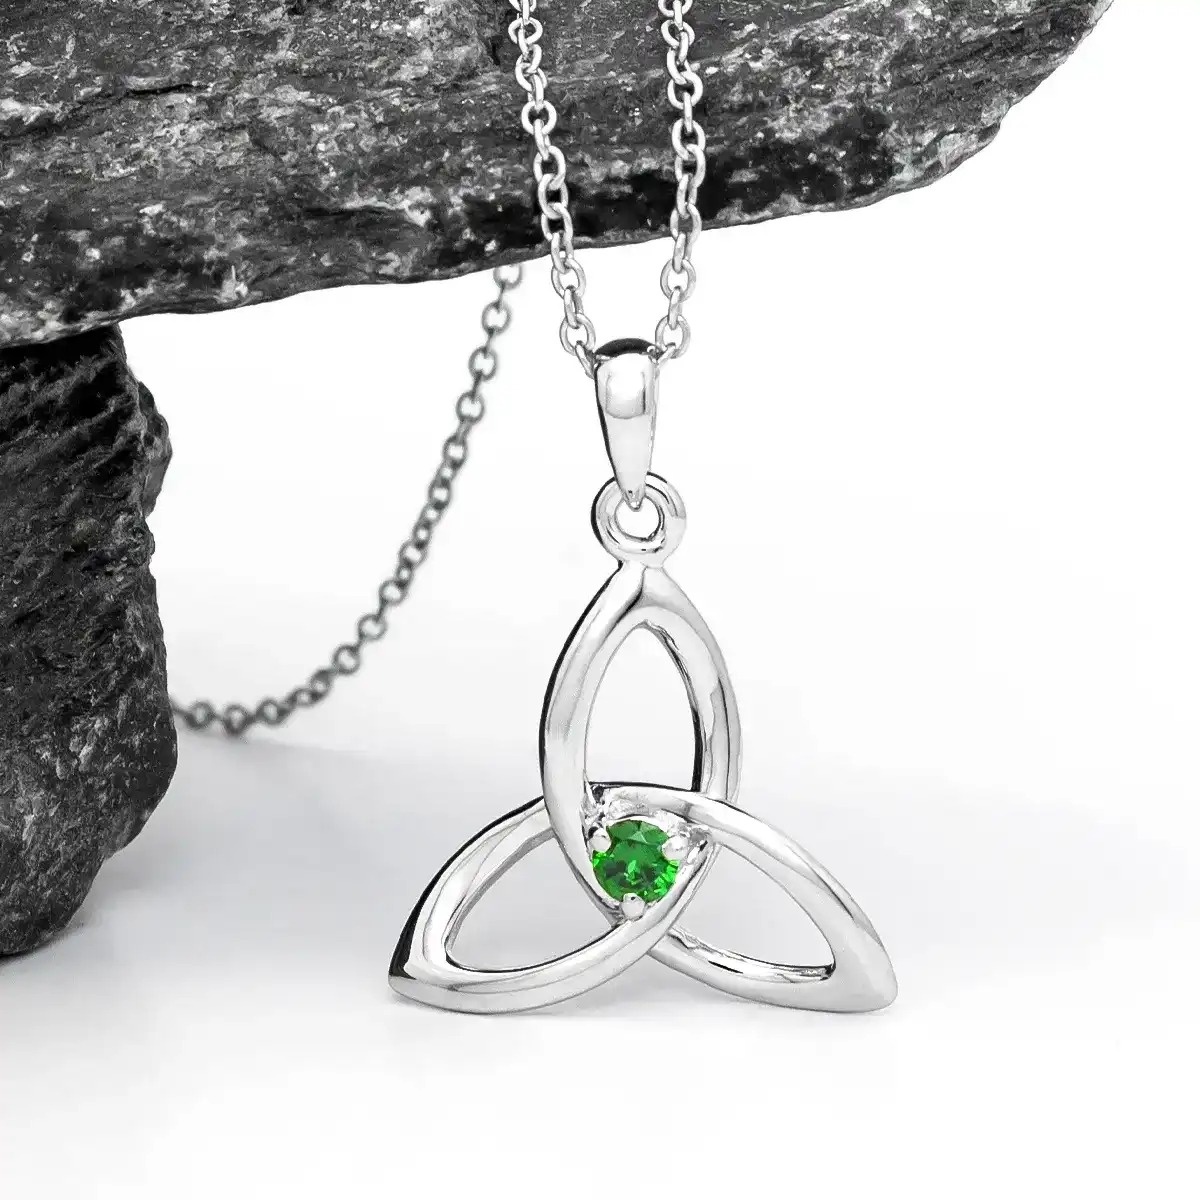 Trinity Knot Necklace Sterling Silver...